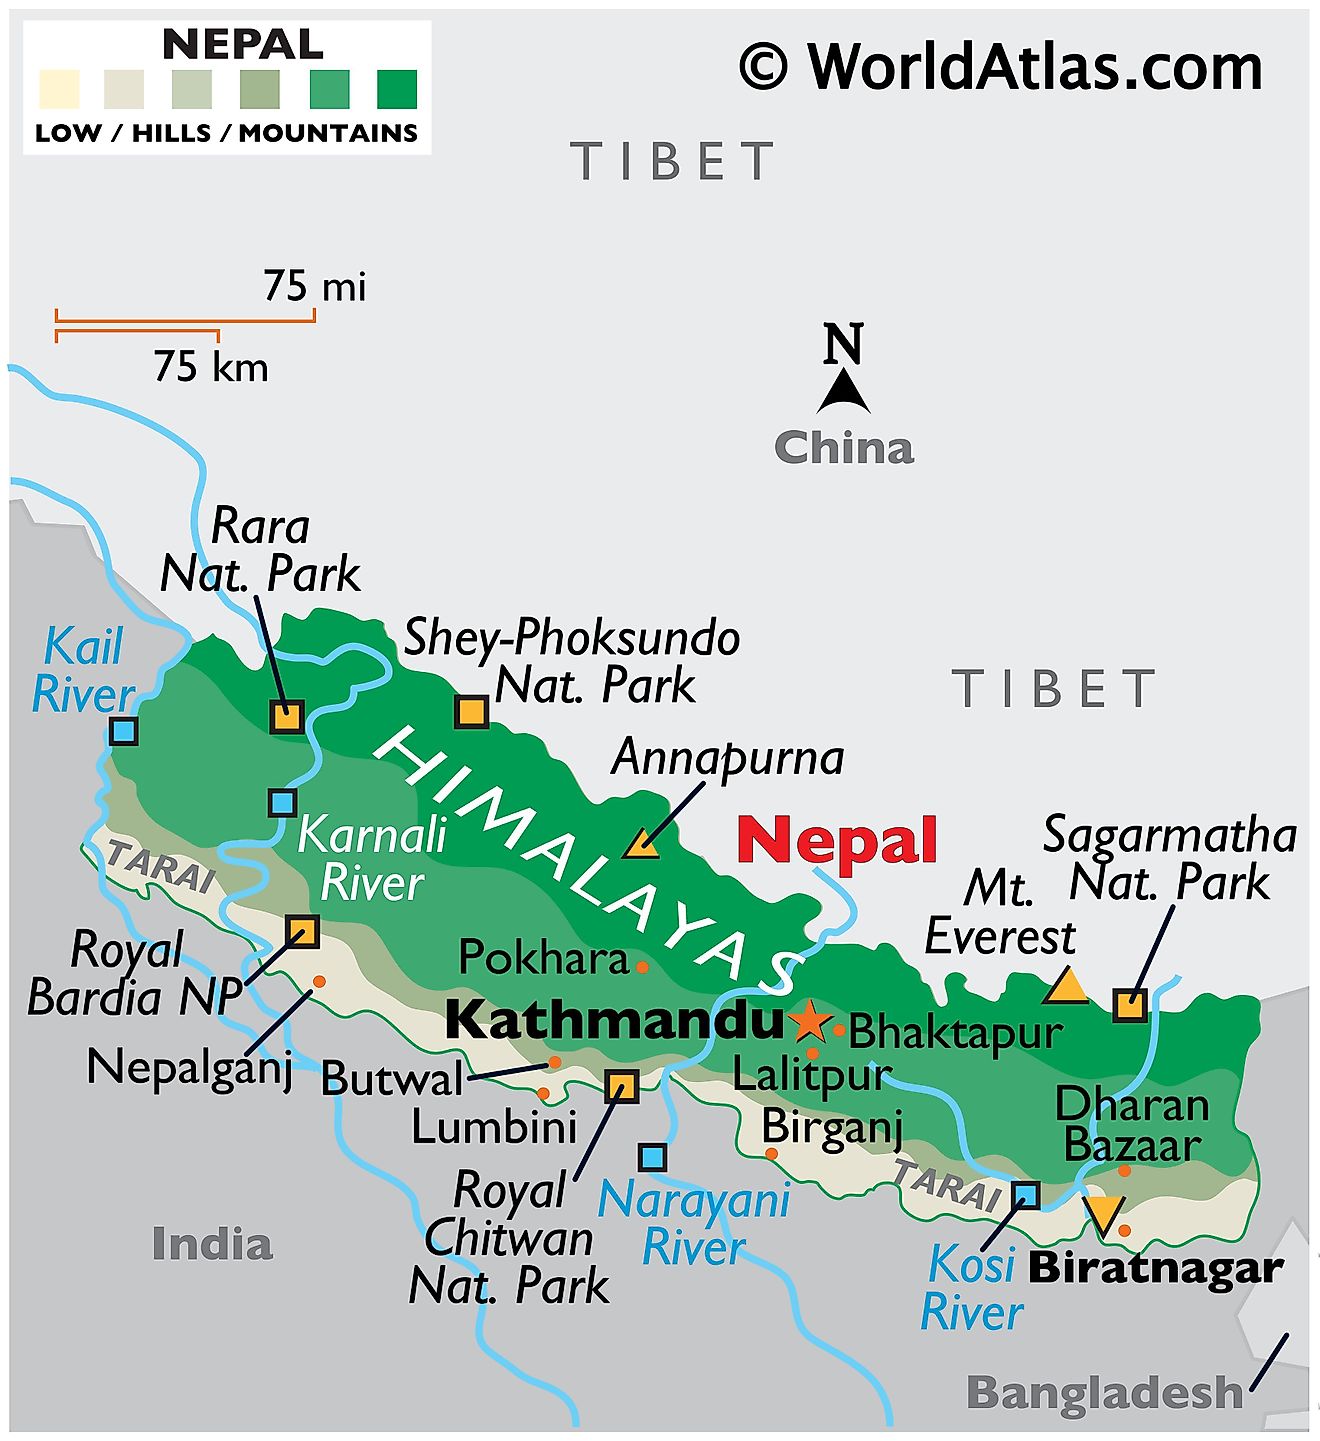 Physical Map of Nepal showing state boundaries, relief, Mount Everest, major rivers, important cities, extreme points, and national parks.